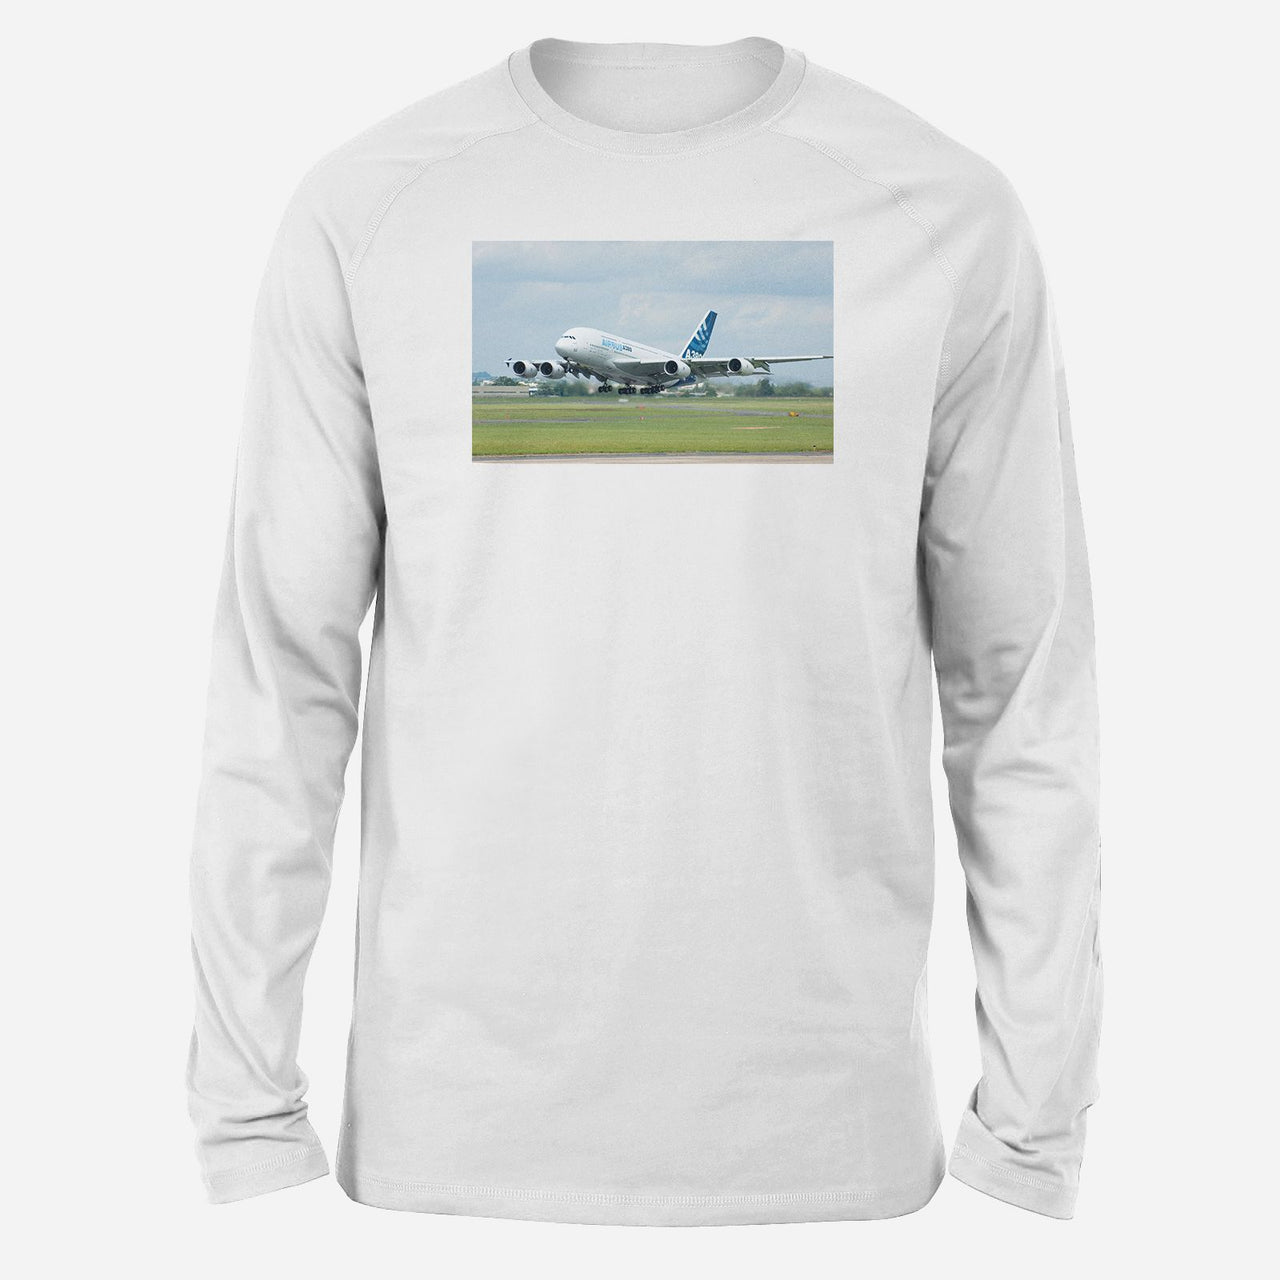 Departing Airbus A380 with Original Livery Designed Long-Sleeve T-Shirts